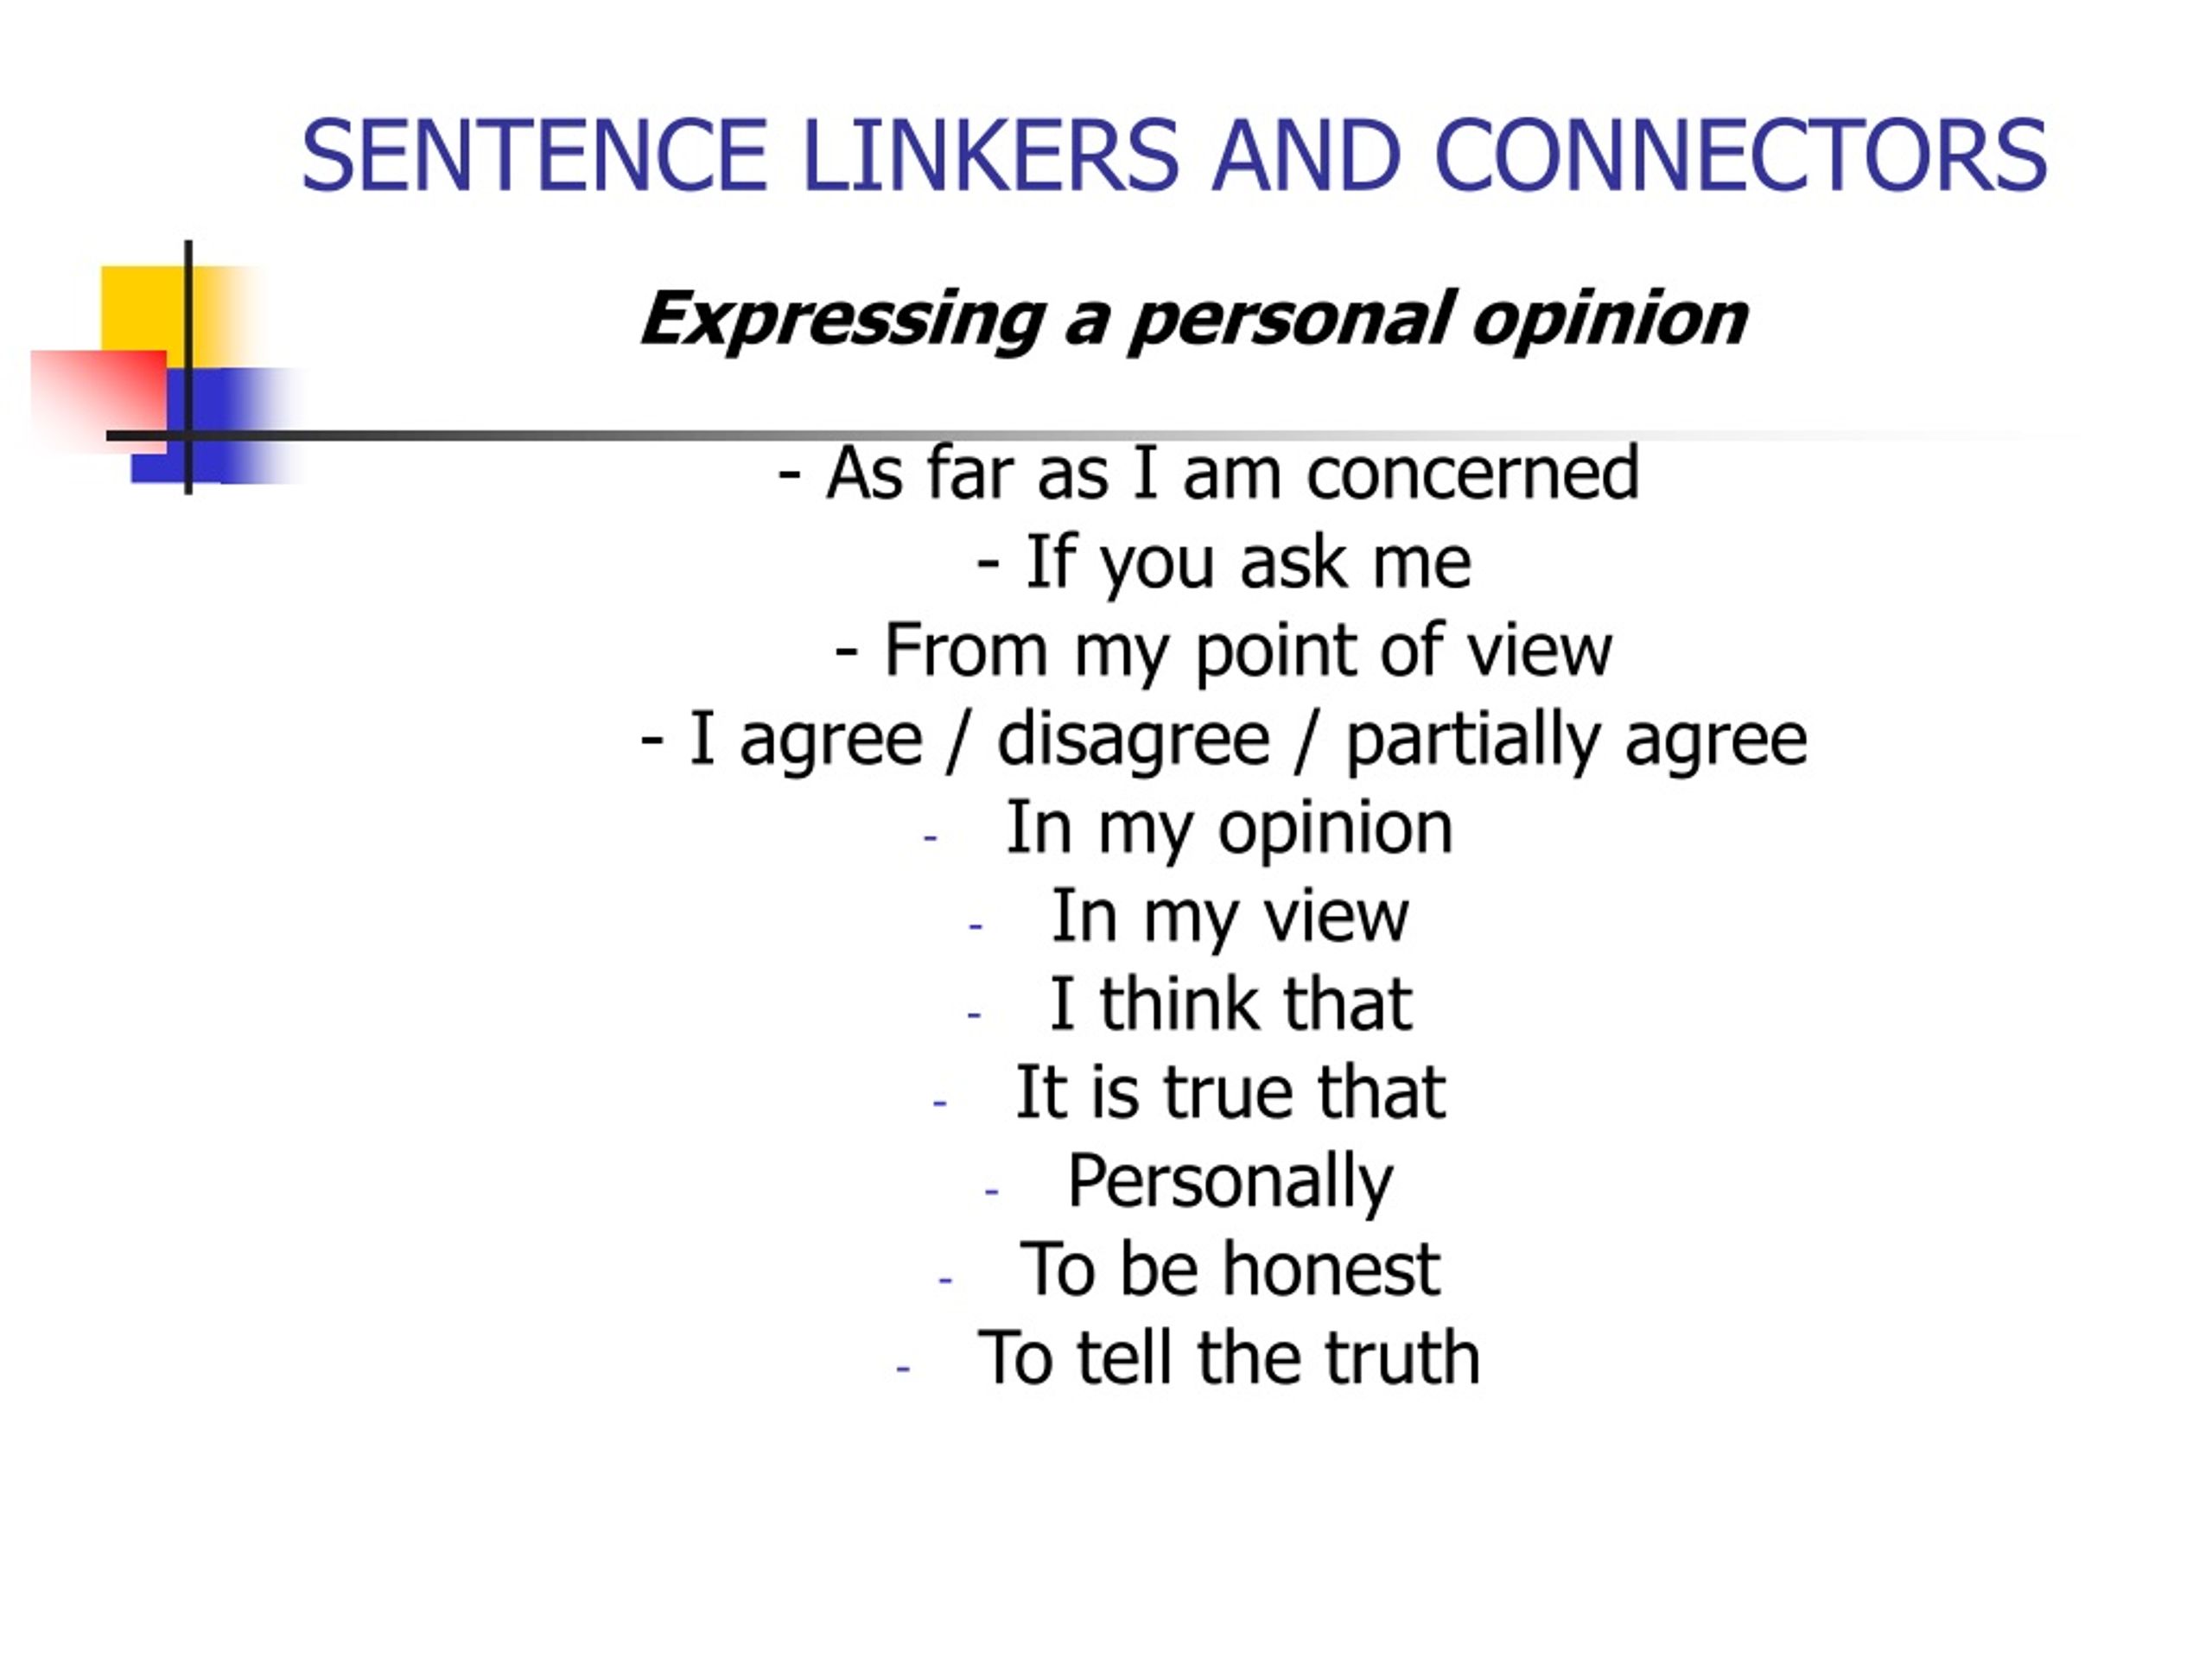 ppt-sentence-linkers-and-connectors-powerpoint-presentation-free-download-id-8682606